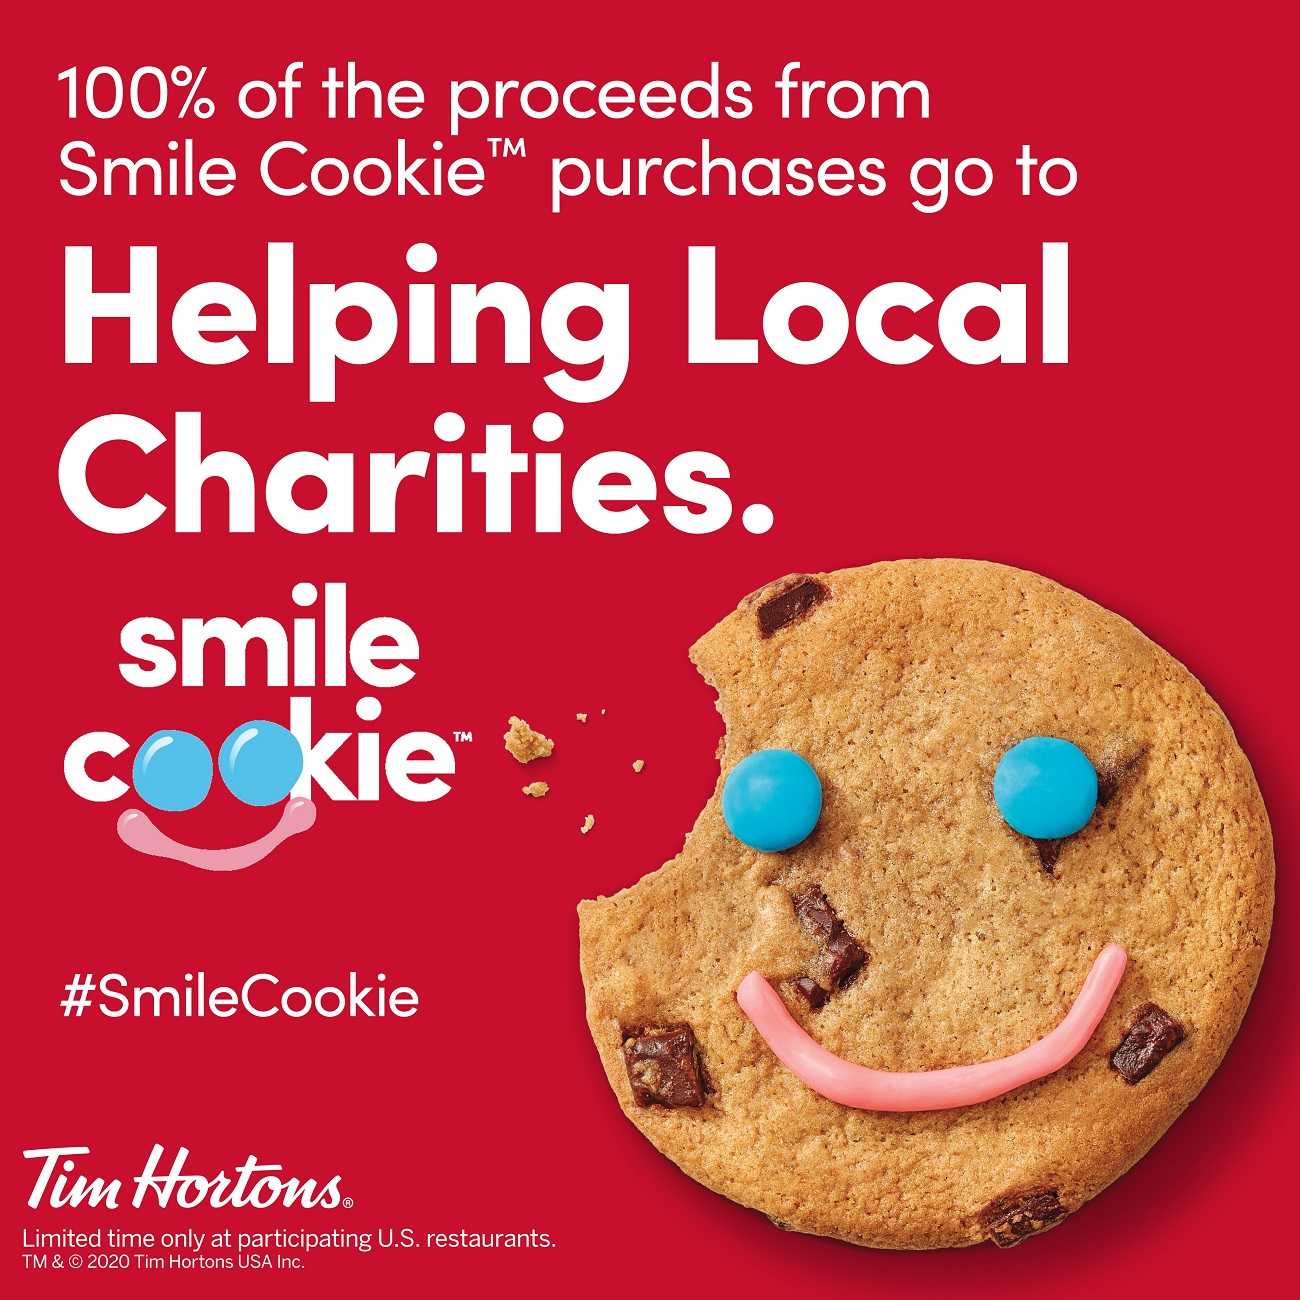 Tim Hortons Smile Cookie Campaign back to support over 26 charities